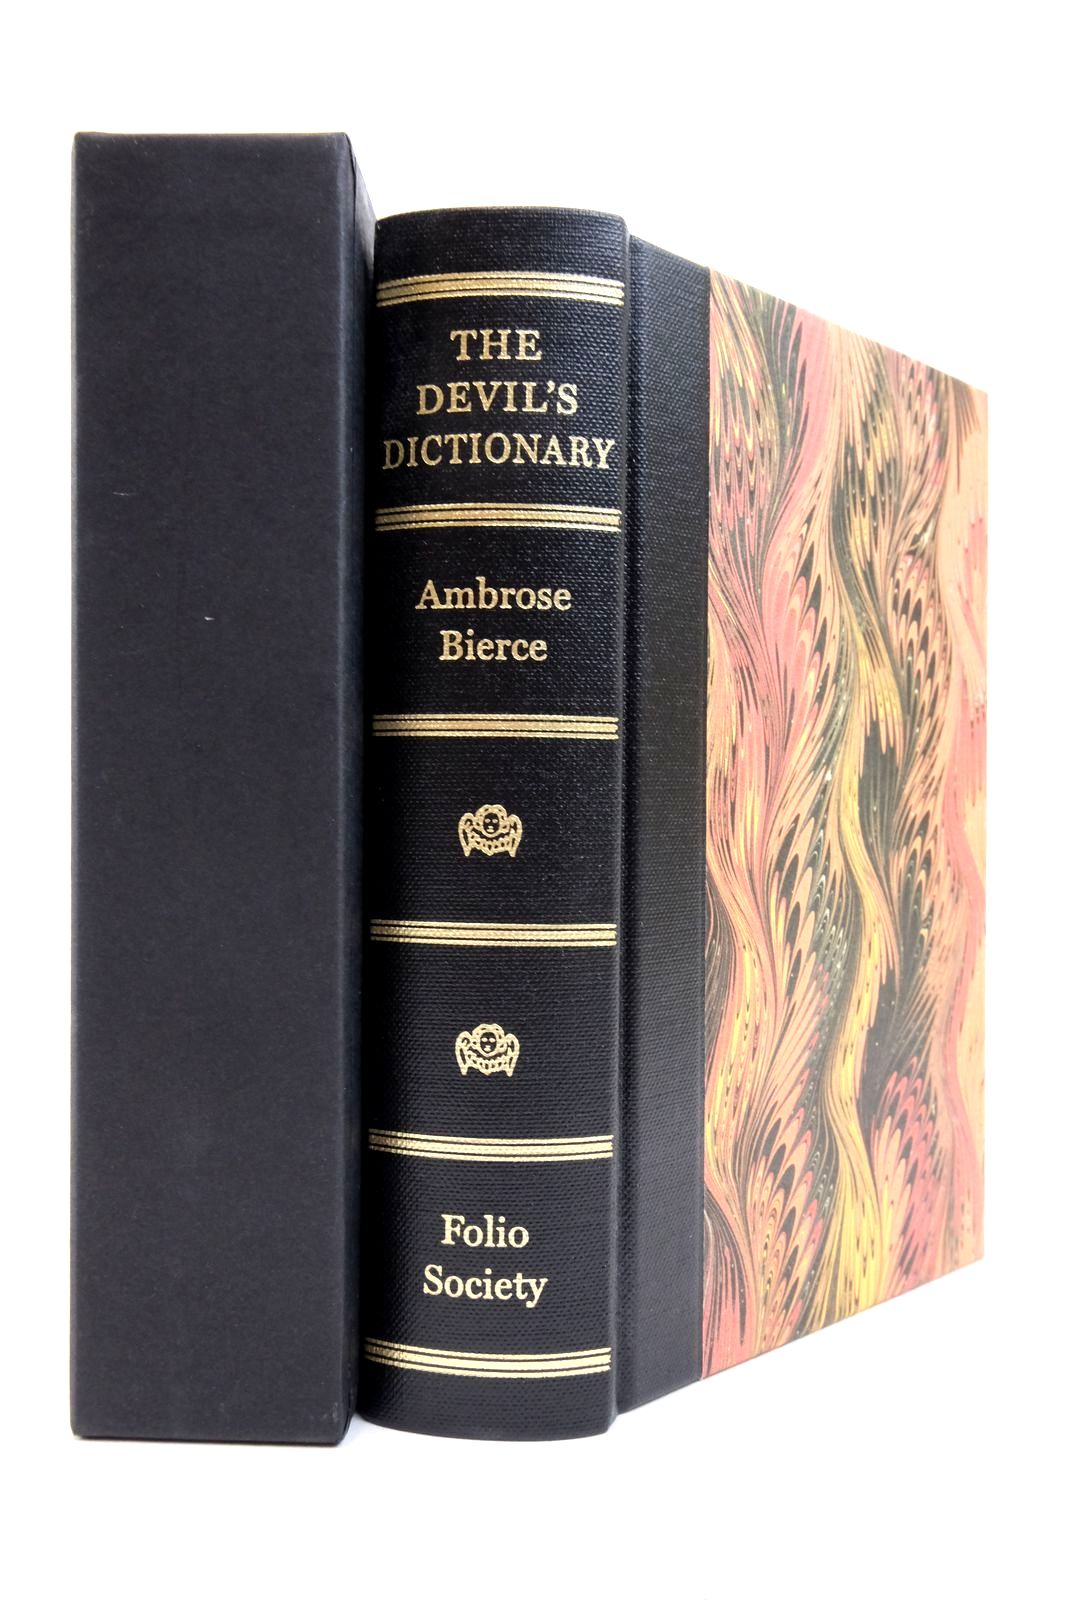 Photo of THE DEVIL'S DICTIONARY written by Bierce, Ambrose Kington, Miles illustrated by Forster, Peter published by Folio Society (STOCK CODE: 2137830)  for sale by Stella & Rose's Books